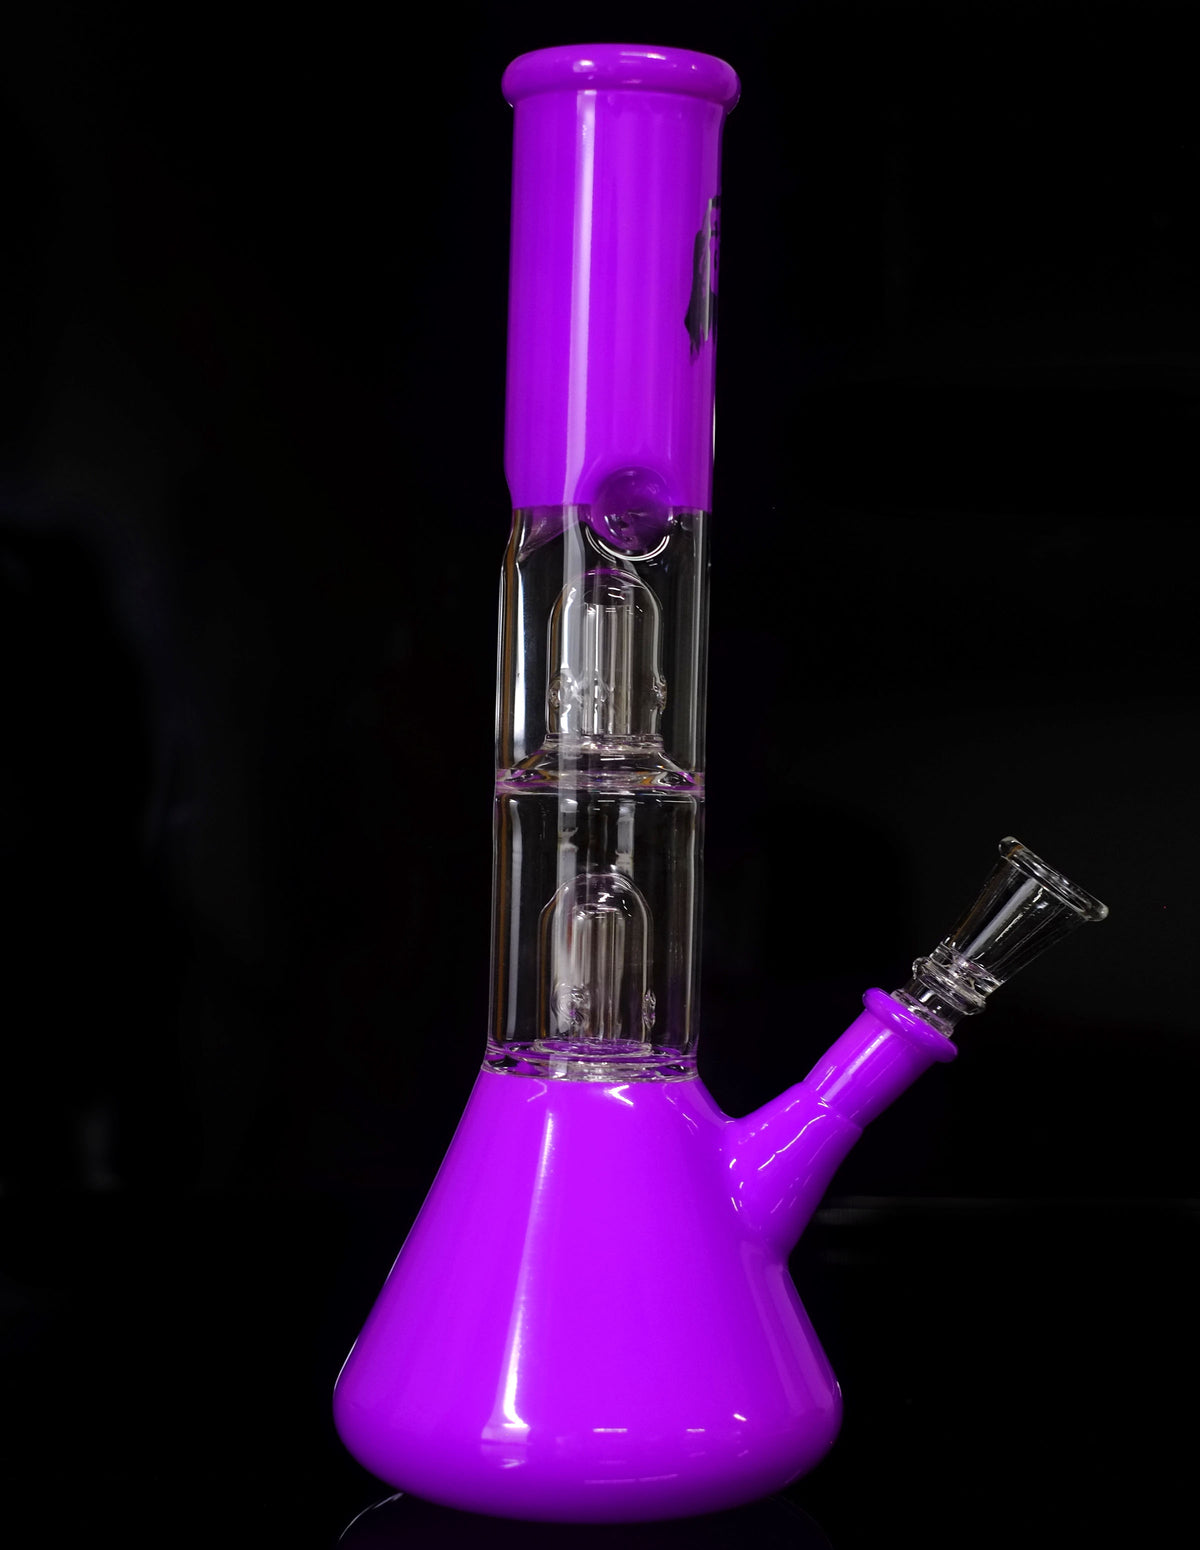 12" Light weight Purple Glass Water Bong Pipe  - Clearance